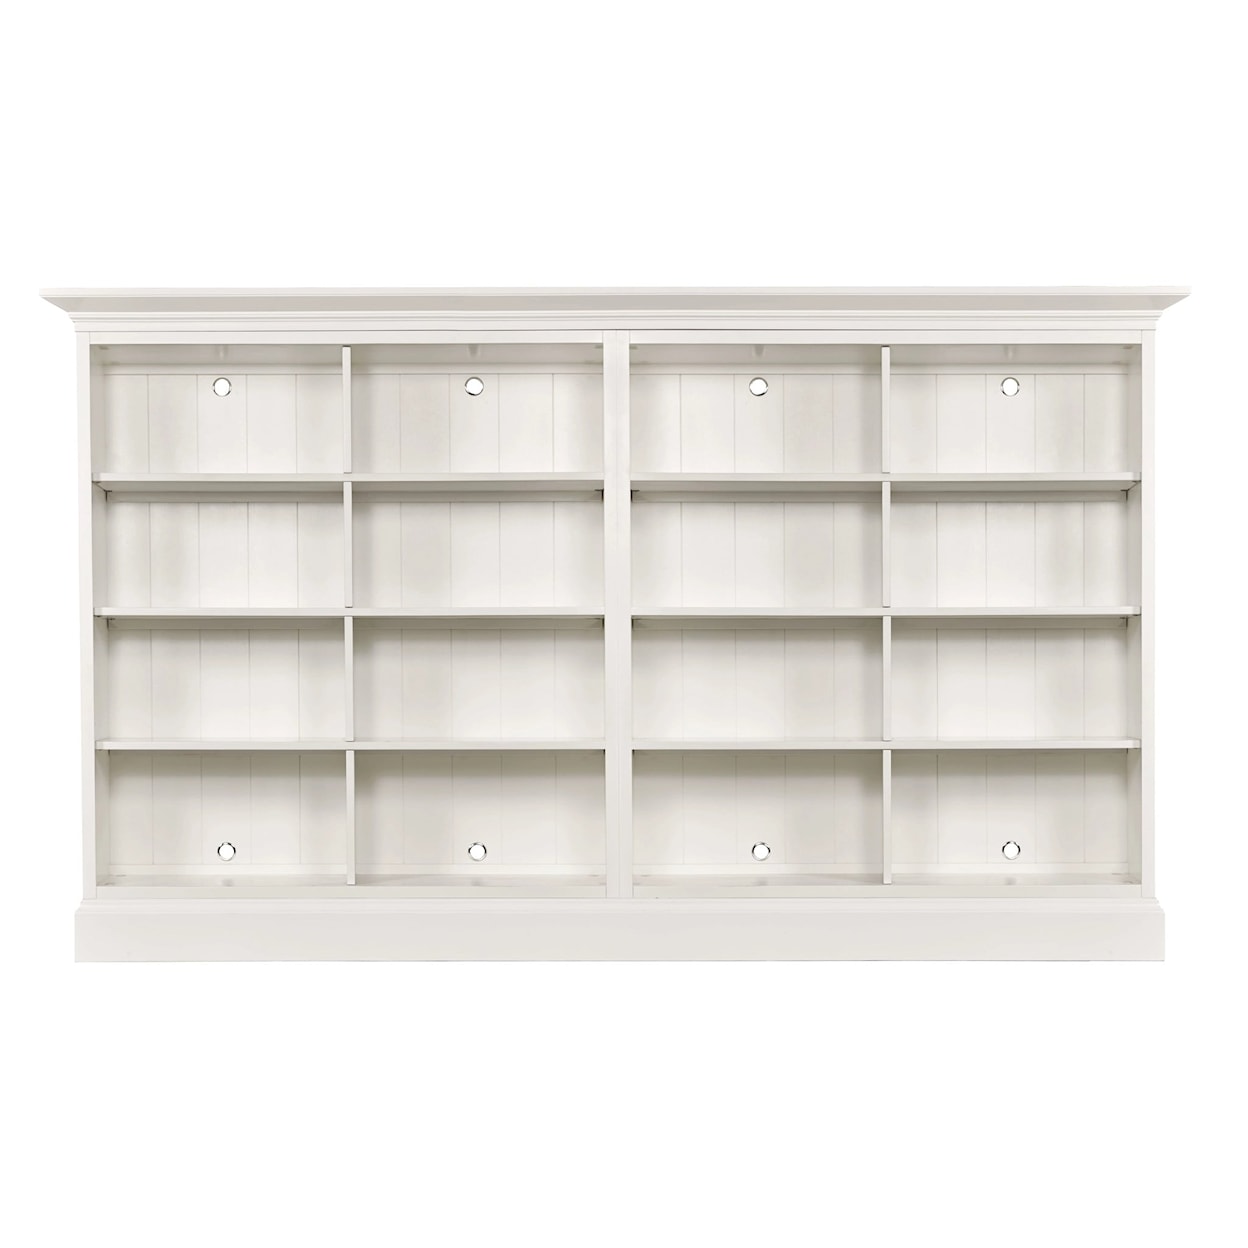 Hammary Structures Quad Mid Height Bookcase